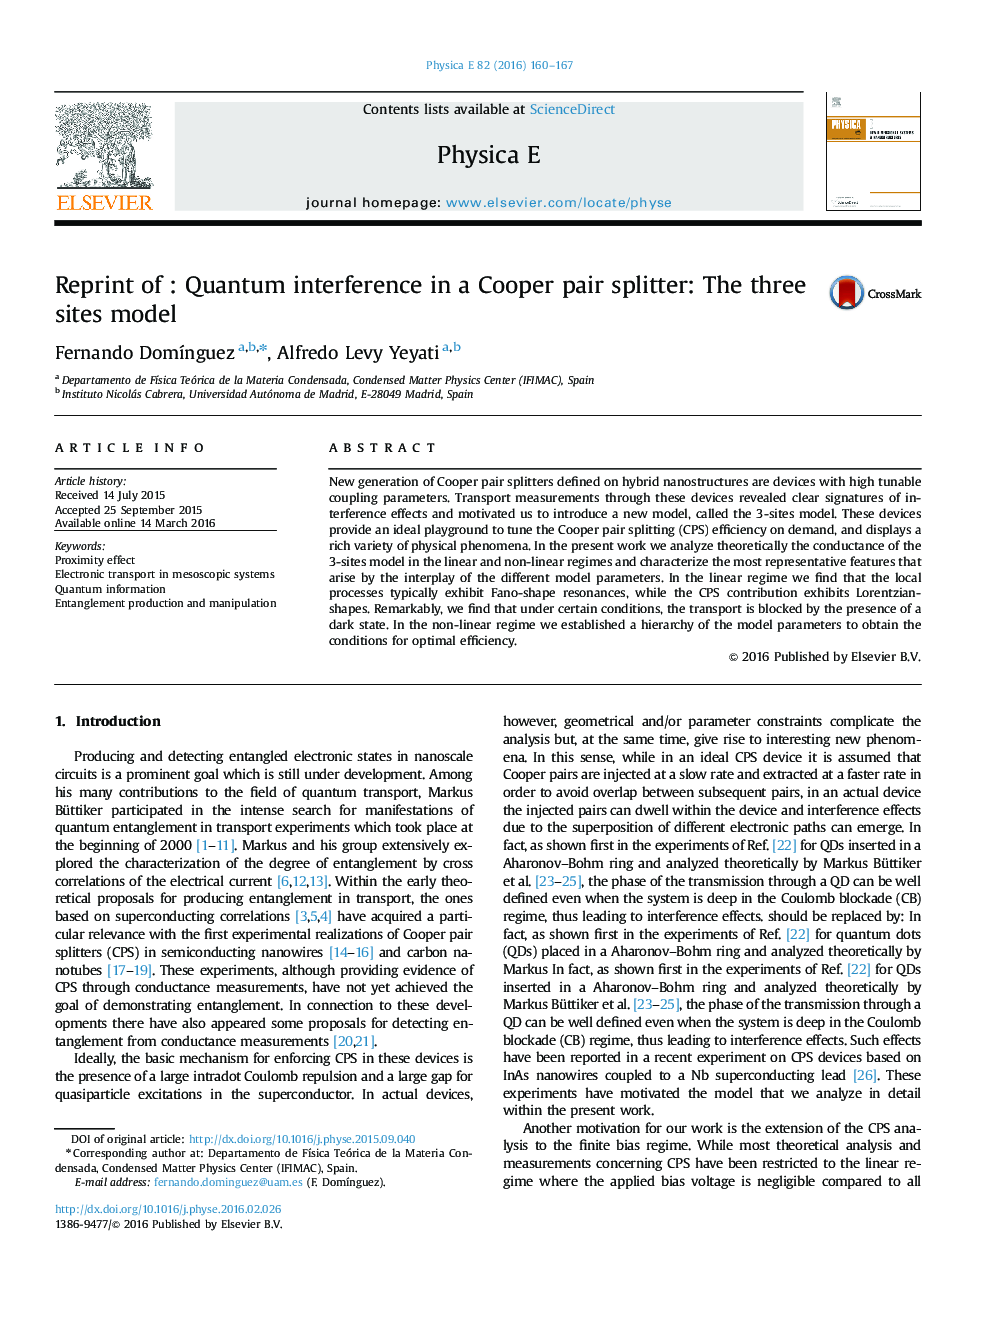 Reprint of : Quantum interference in a Cooper pair splitter: The three sites model